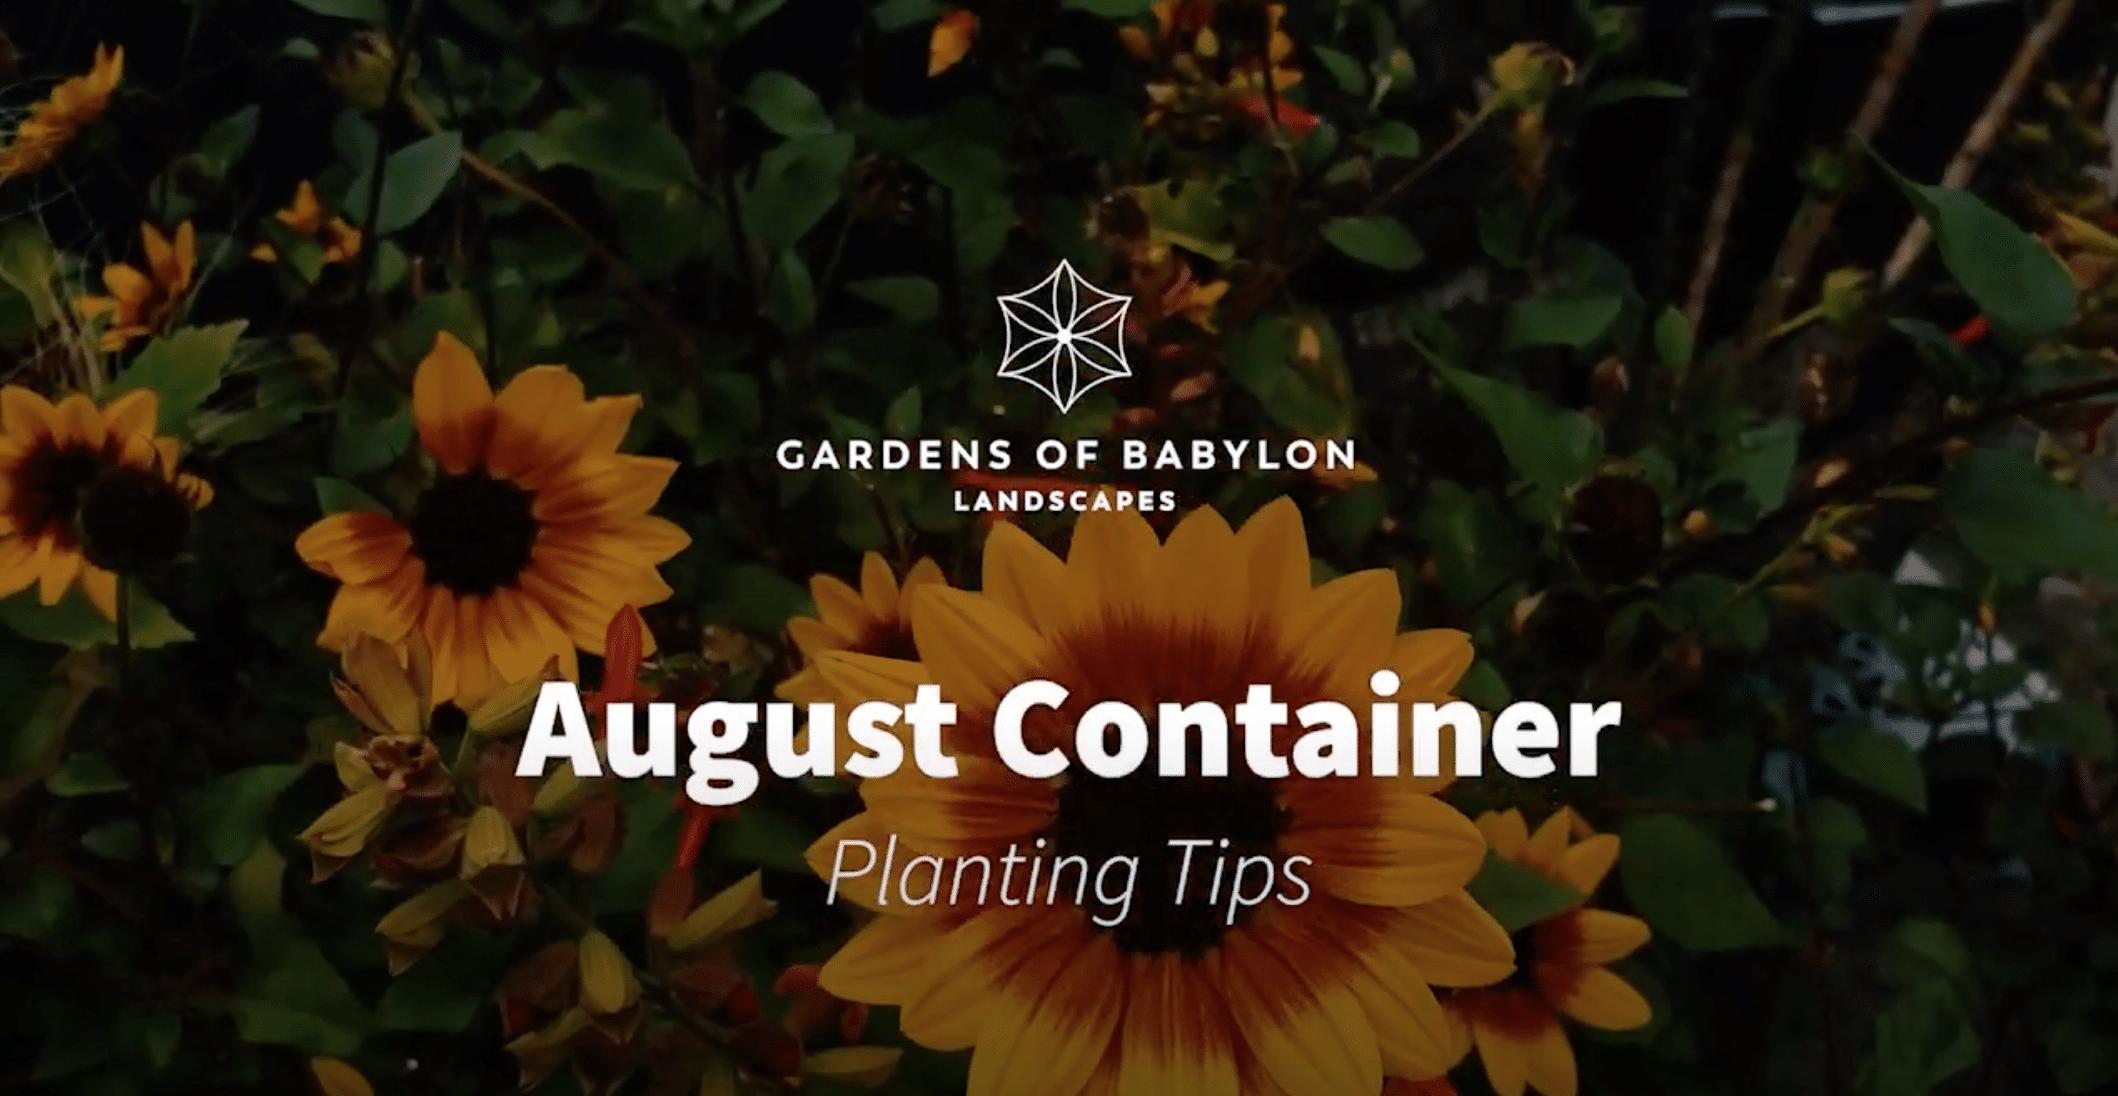 August Container Tips